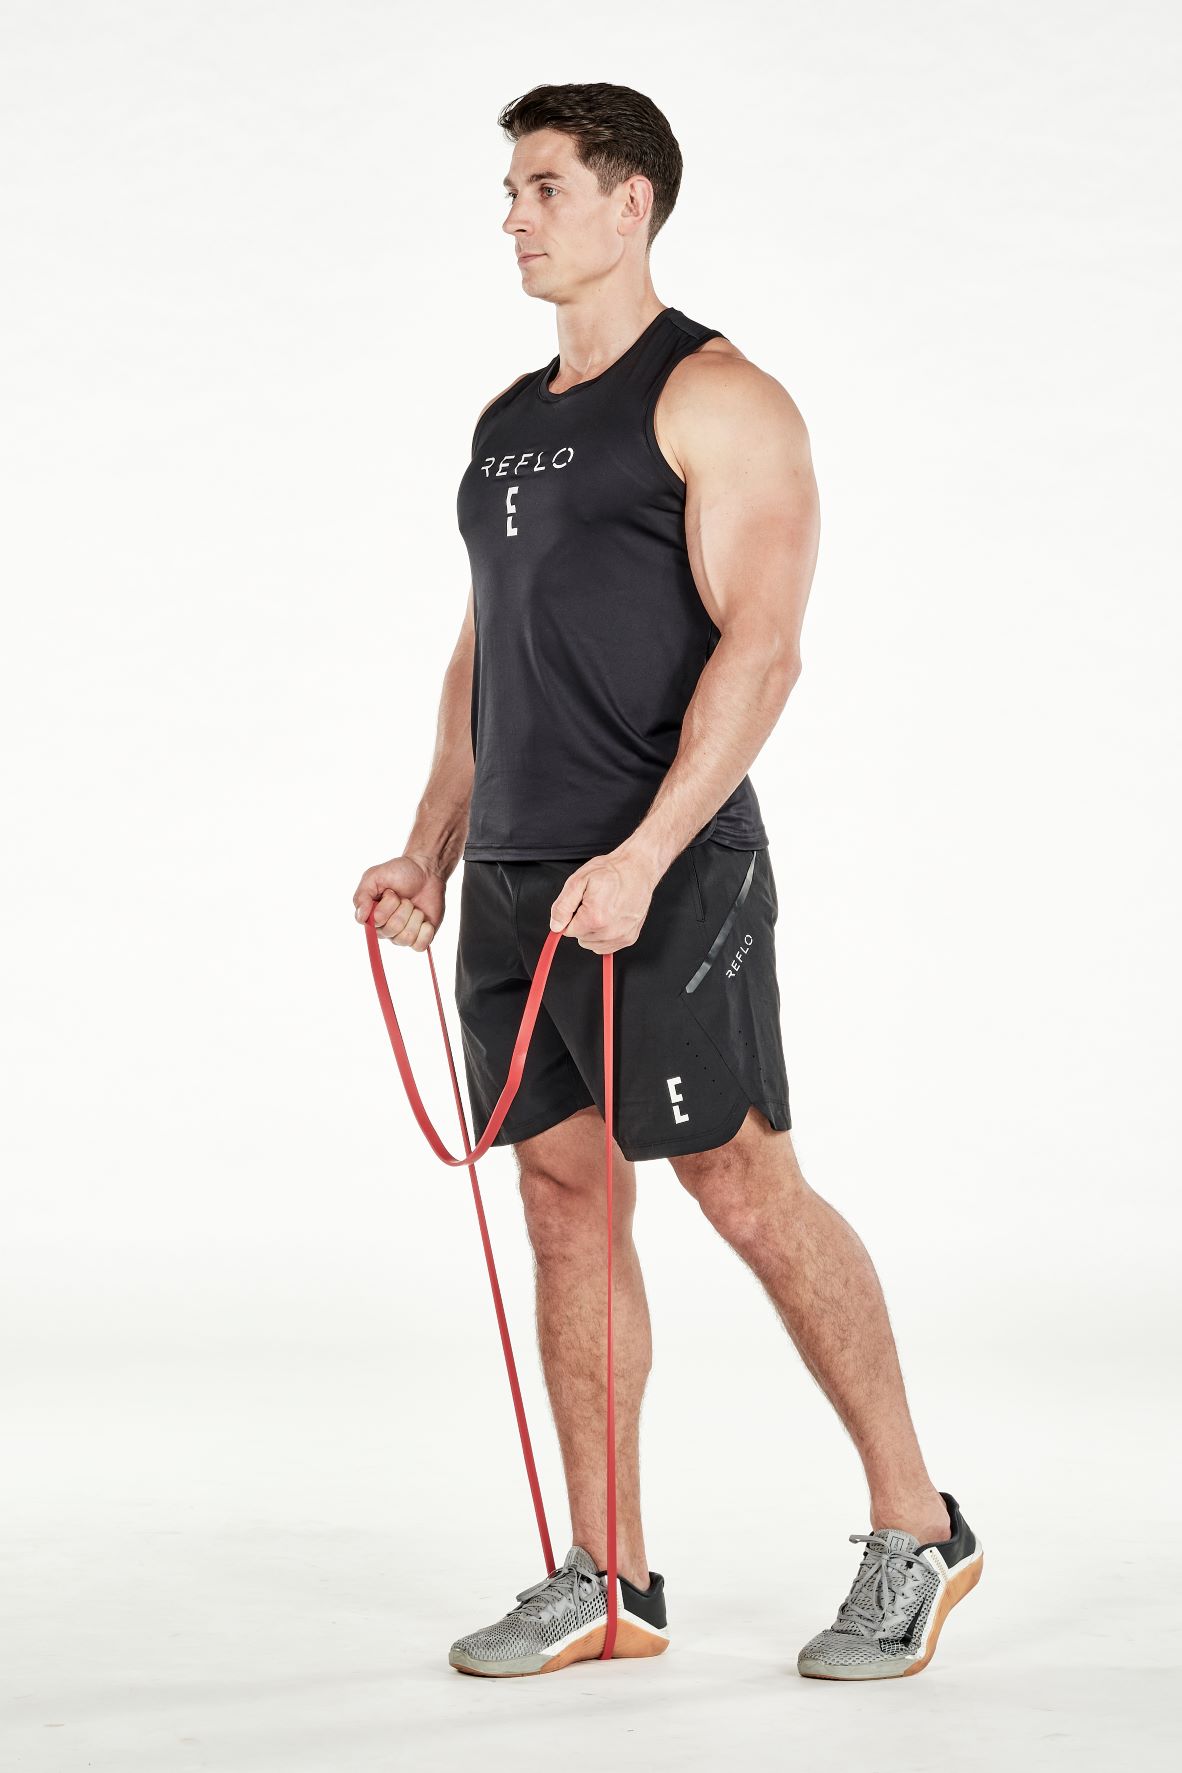 man demonstrating step one of resistance band biceps curl; standing up straight, he is holding a resistance band that is wrapped under one foot; he wears a black fitness vest, black shorts and trainers